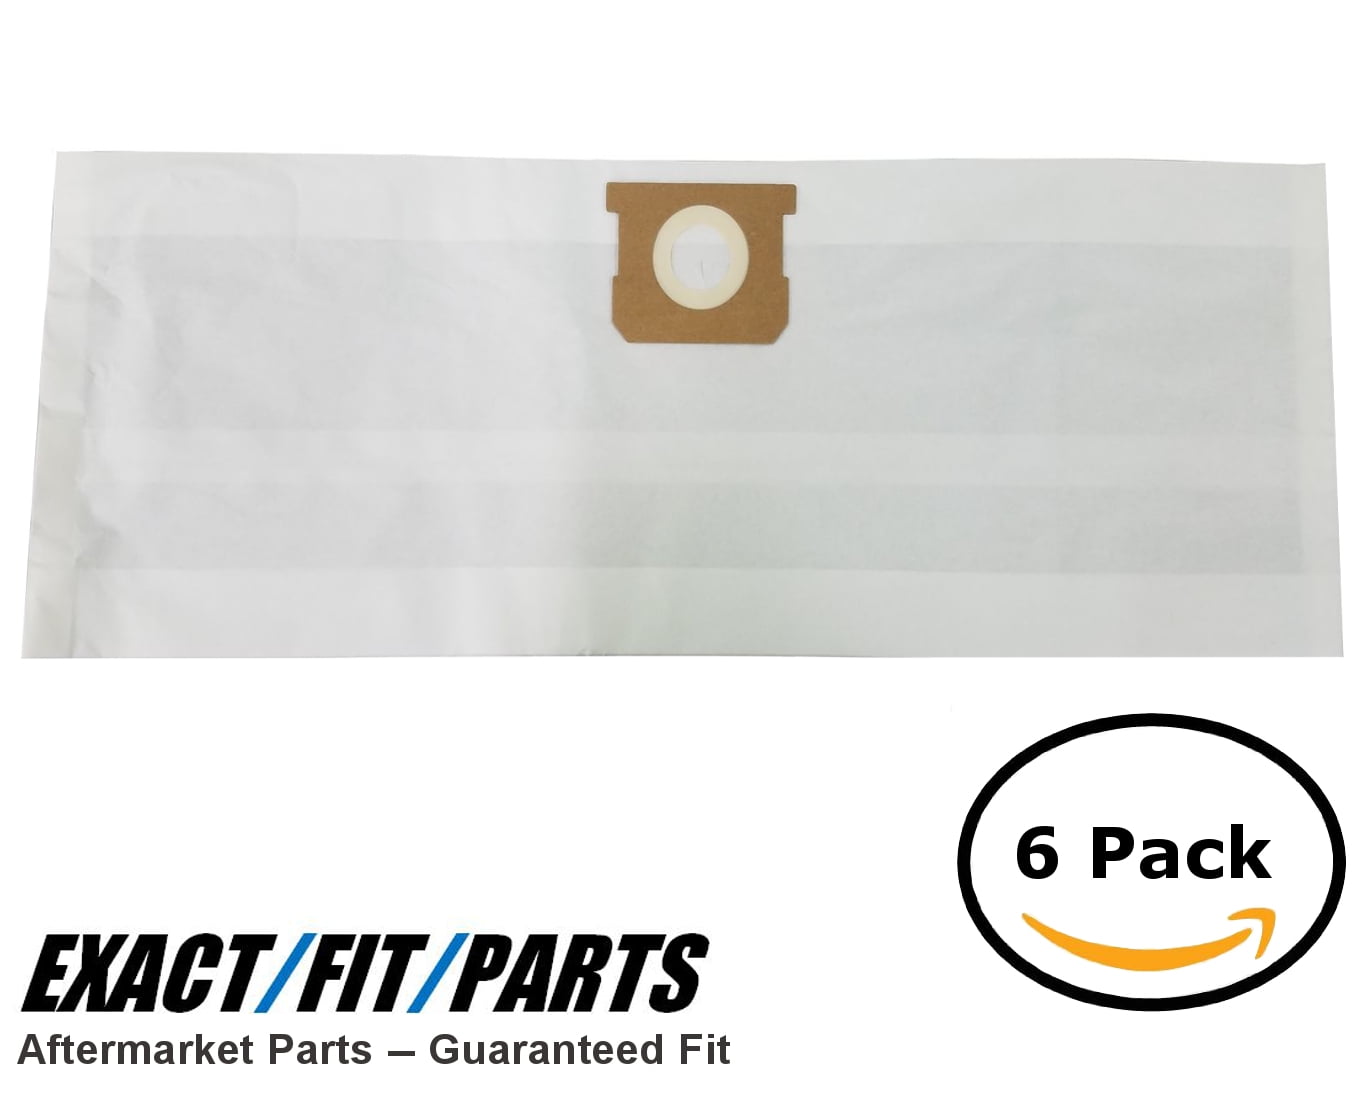 Filter & Bags 5 6 8 Gallon For 90304 90661 Shop Vac Standard Filtration 6 Bags 